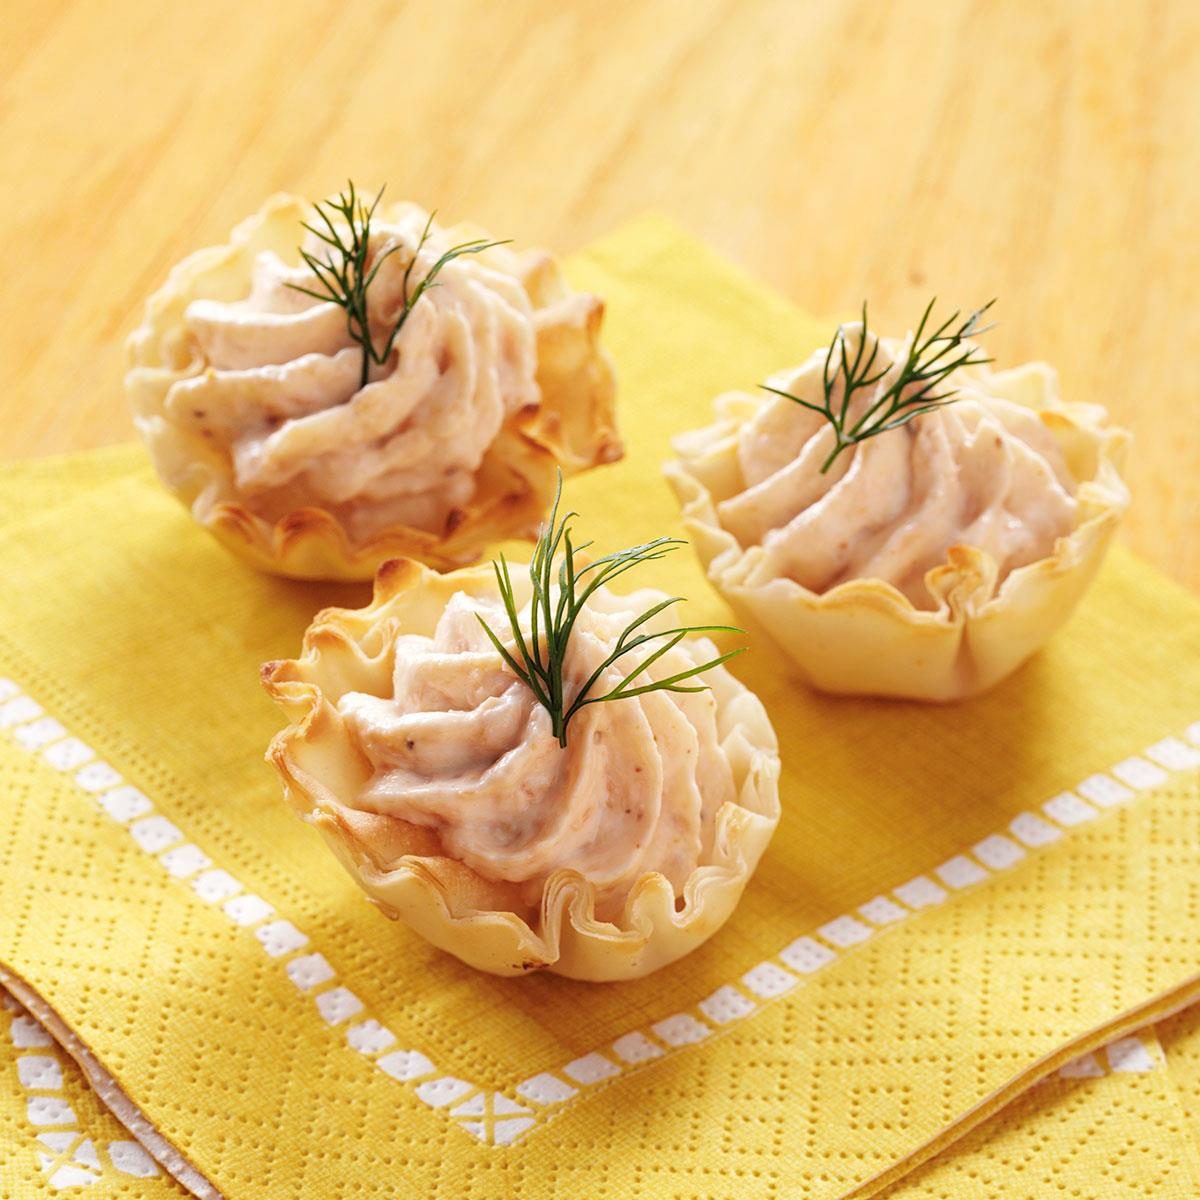 Tin Salmon Mousse Recipe - Serve warm or cold as an appetizer, a main ...